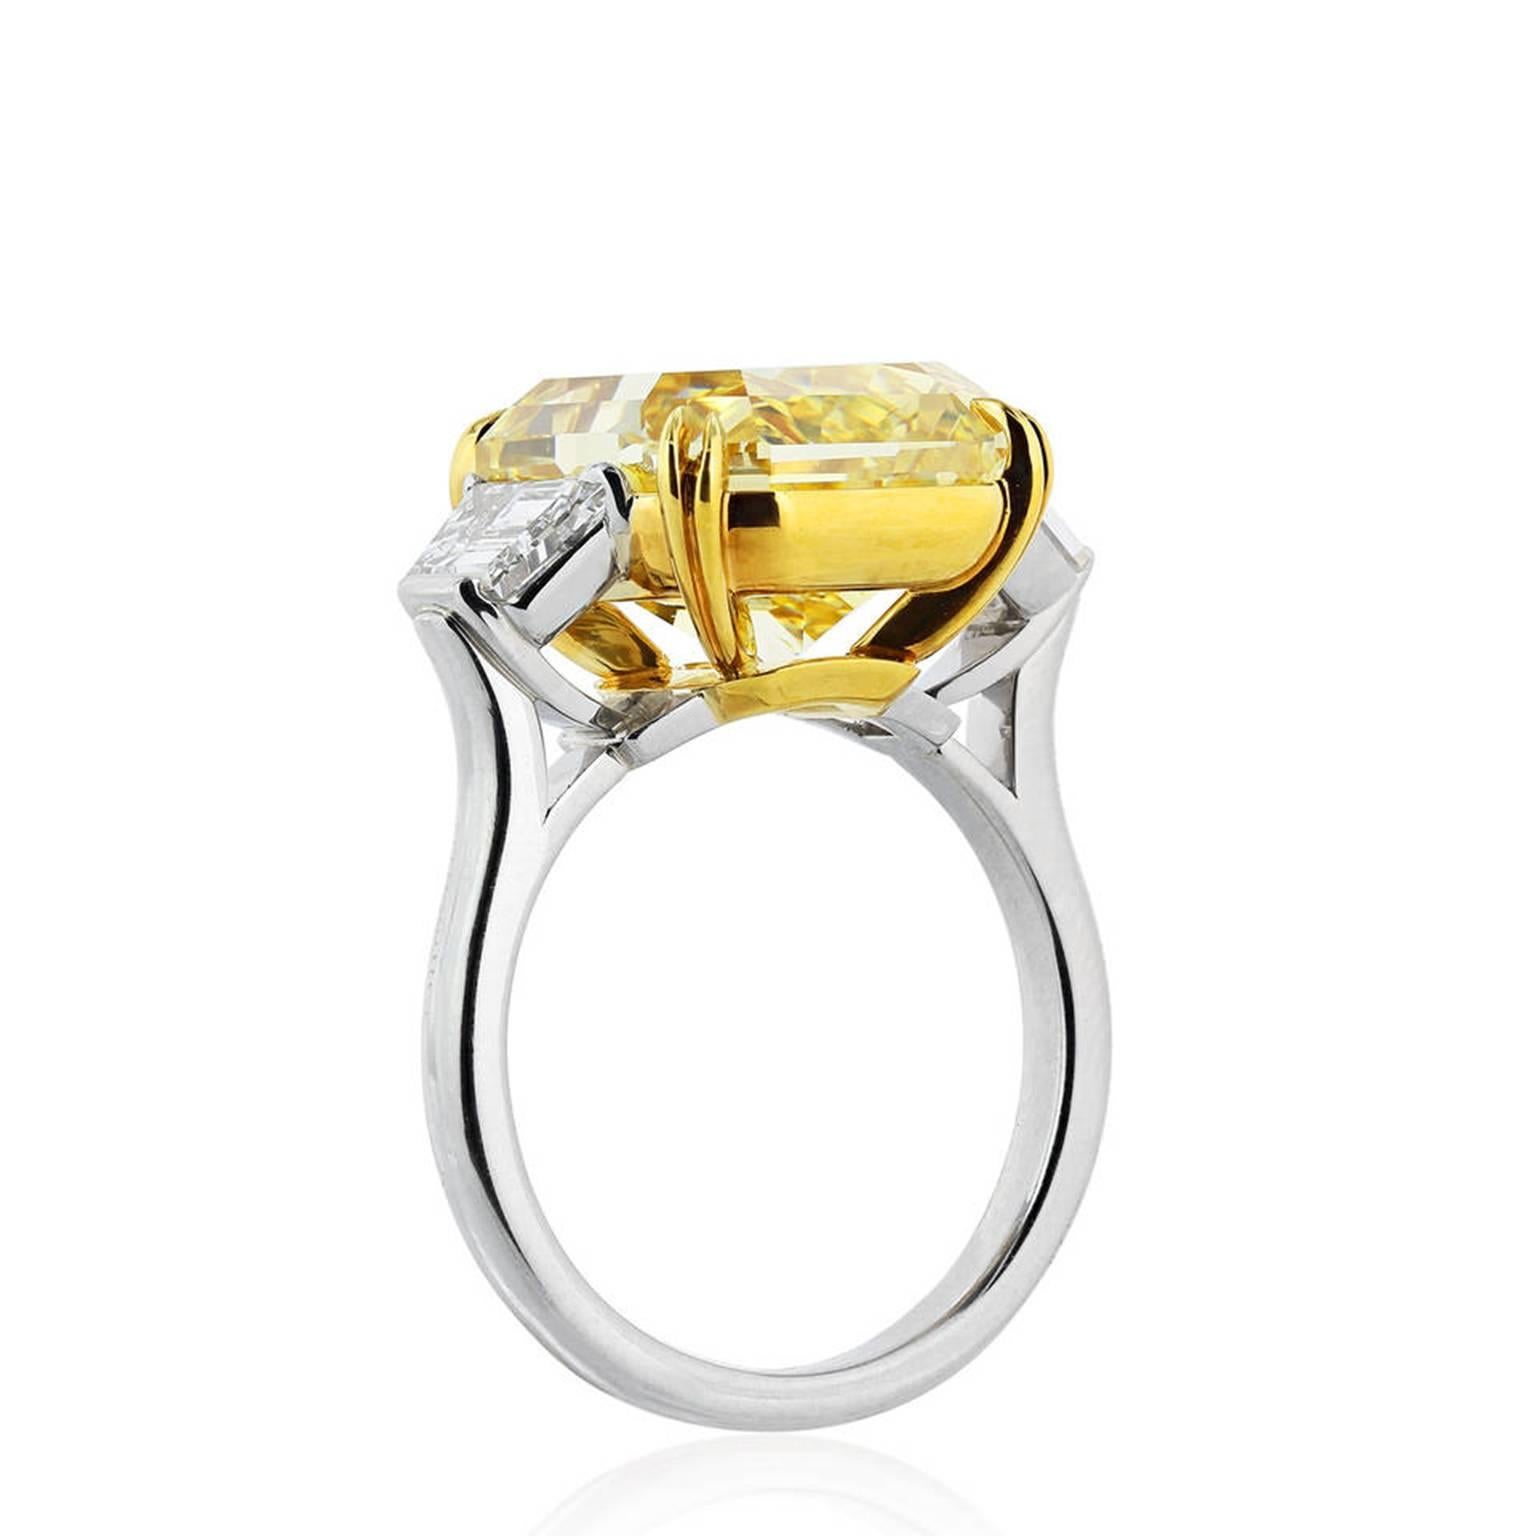 Magnificent Platinum and 18 Karat Yellow Gold Fancy Yellow Diamond Engagement Ring With Center GIA Certified 10.18 Carat FIY-IF Radiant Cut Diamond Set with Two Step Trapezoids, features 1.75 Carat of Diamond Weight. The Ring available in 6 size,